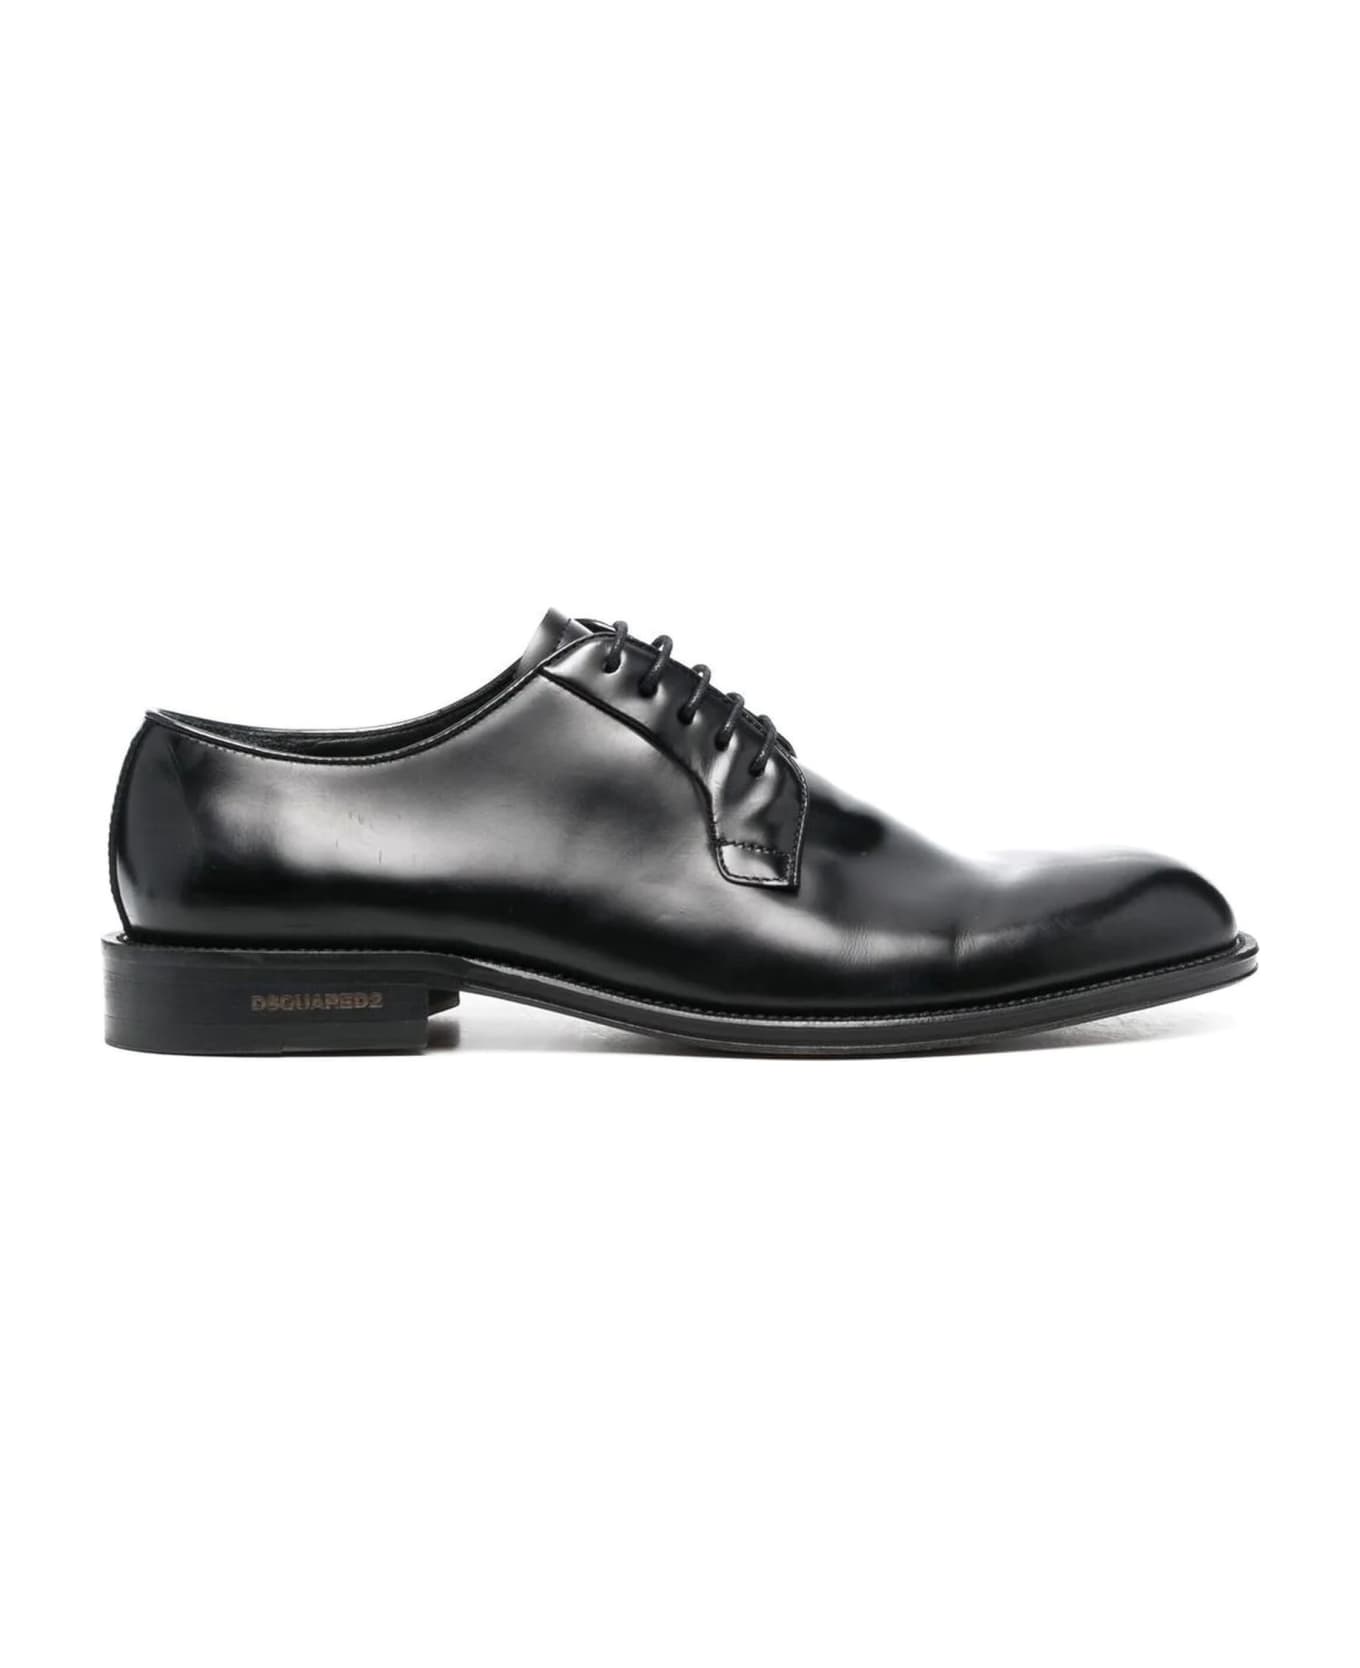 Dsquared2 Black Calf Leather Lace-up Shoes - Nero